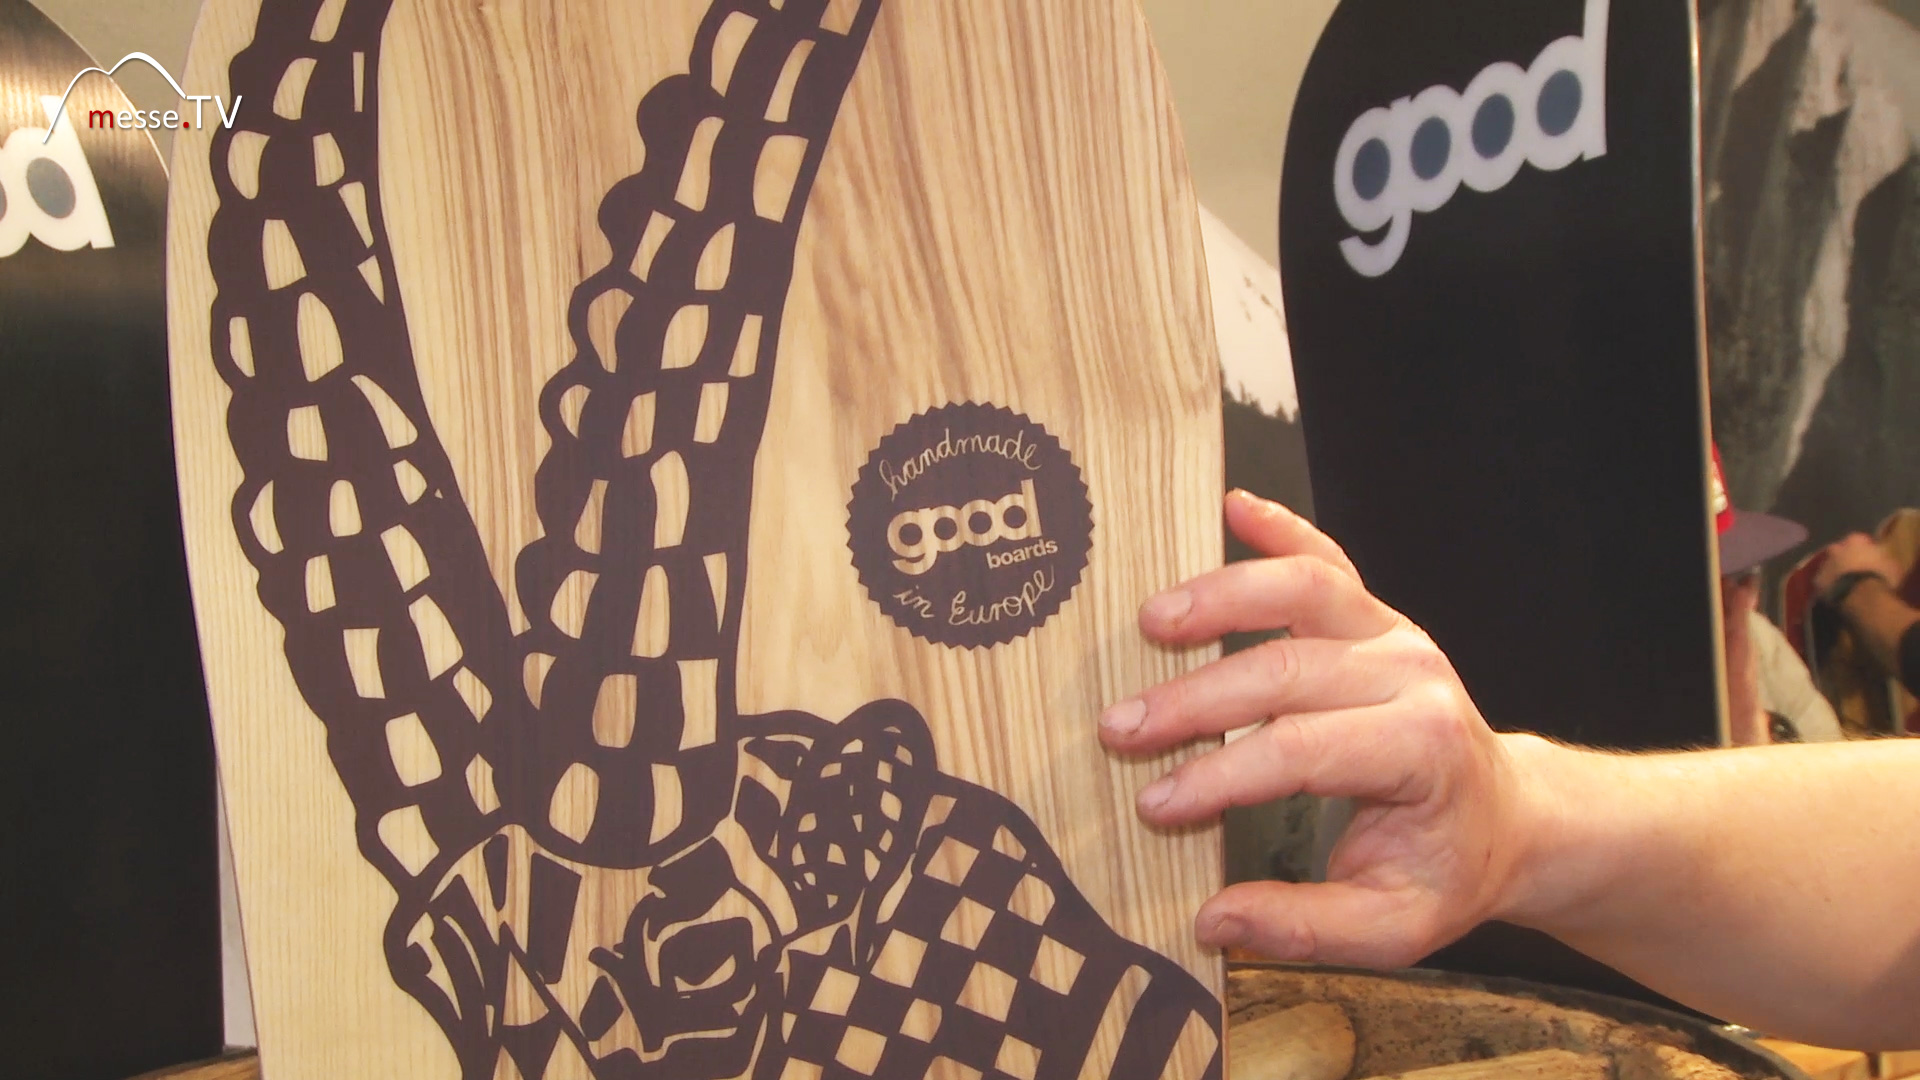 Good Boards Wood Snowboard with Ibex Motif Ispo